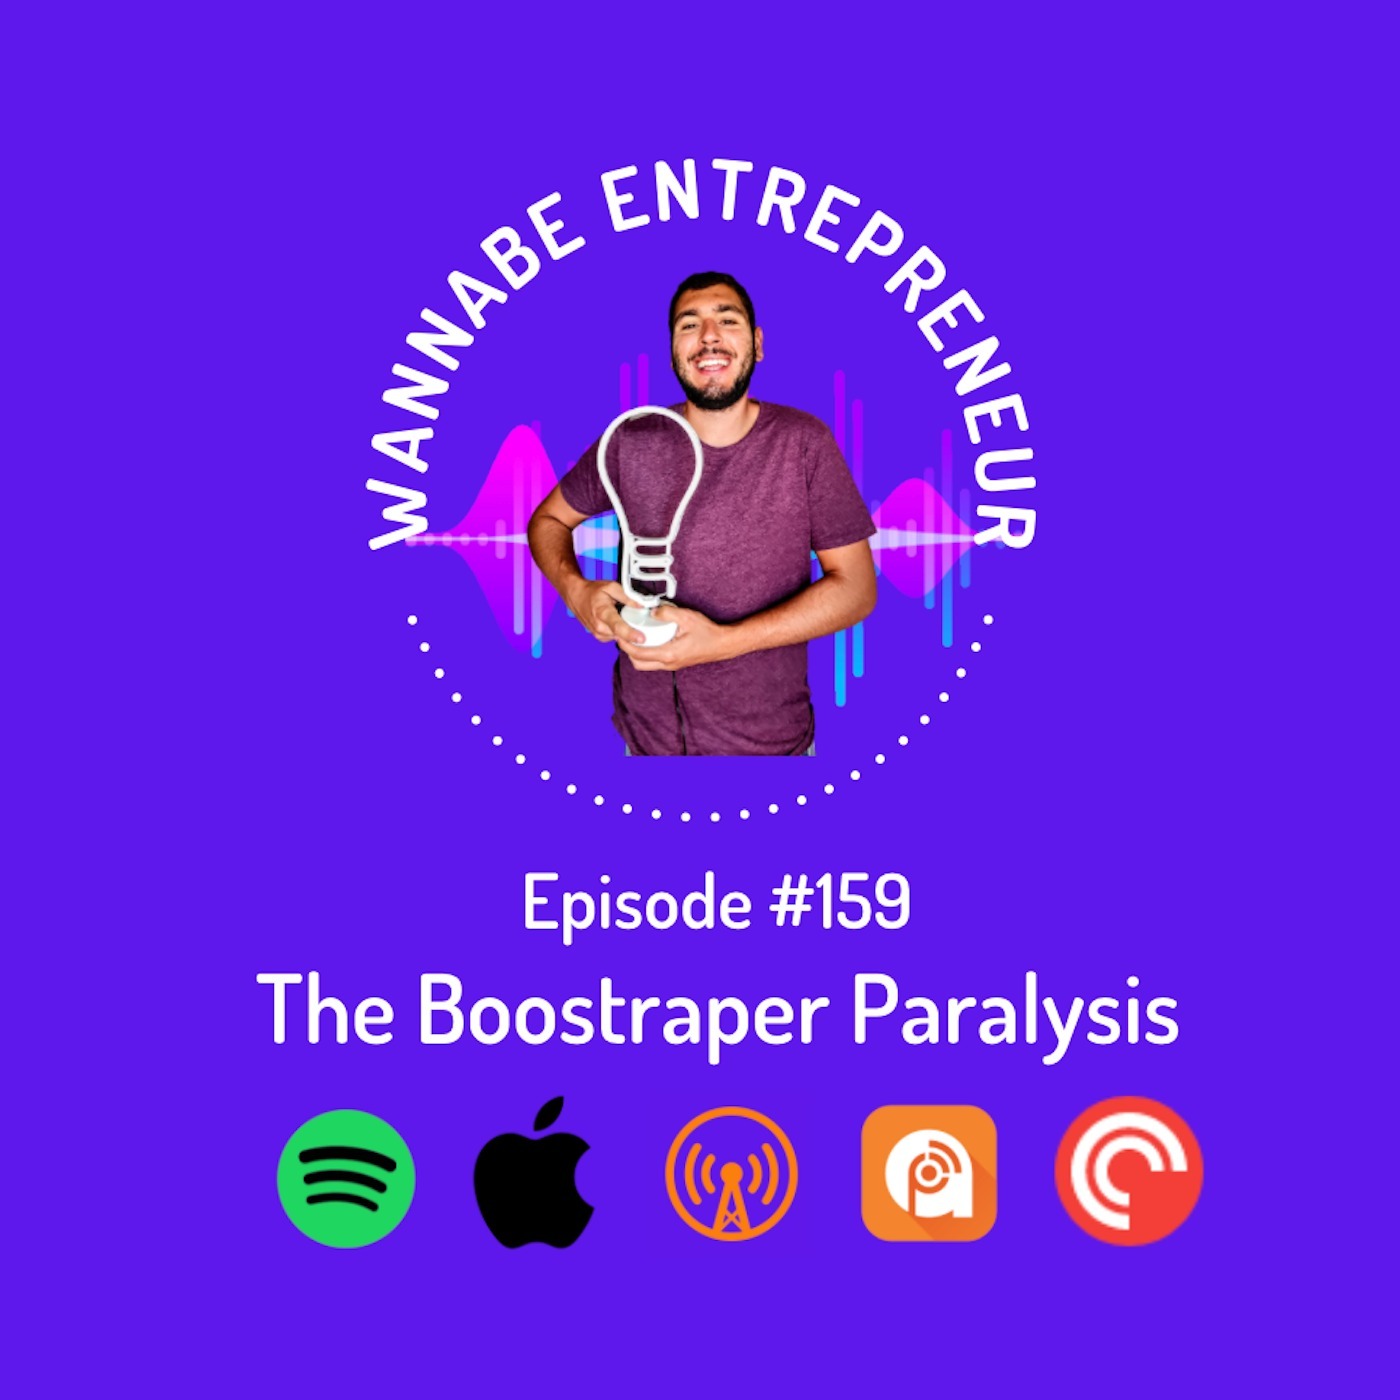 The Boostrapper Paralysis